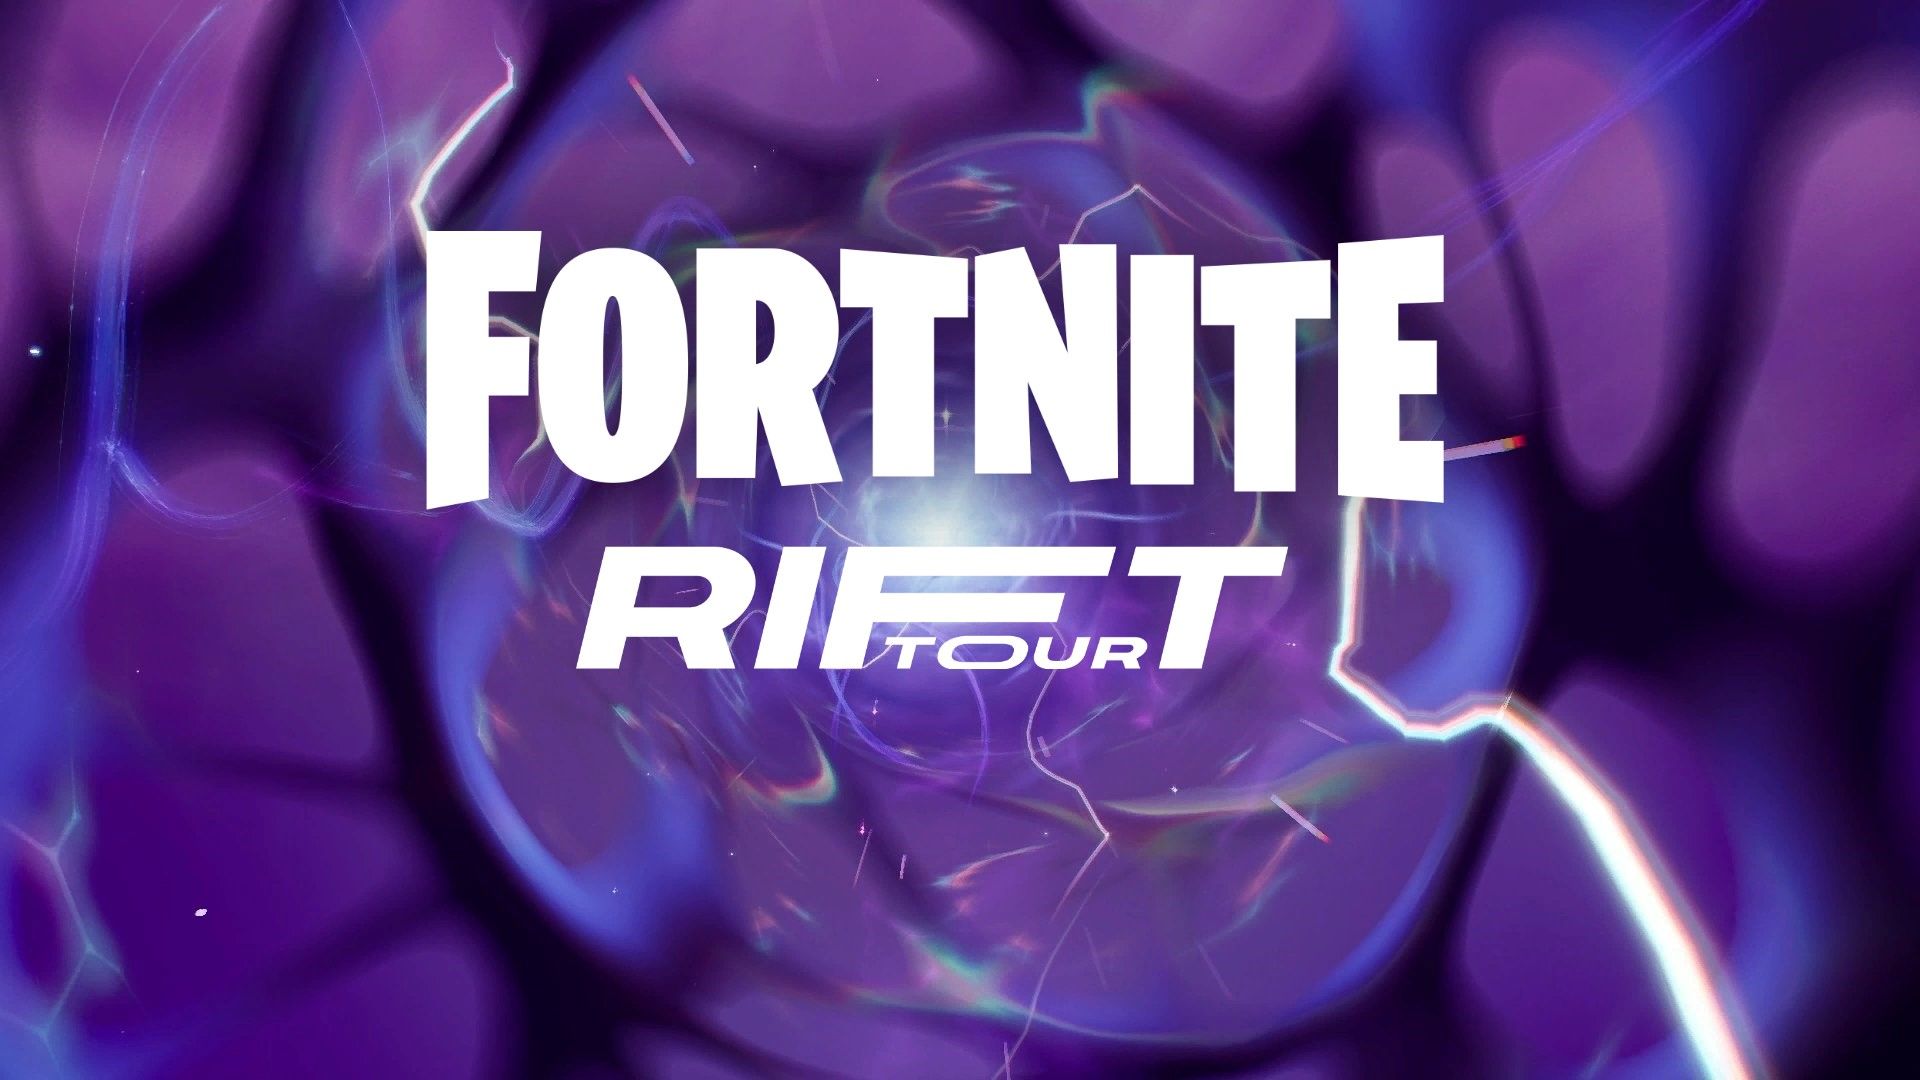 interact with rift tour posters